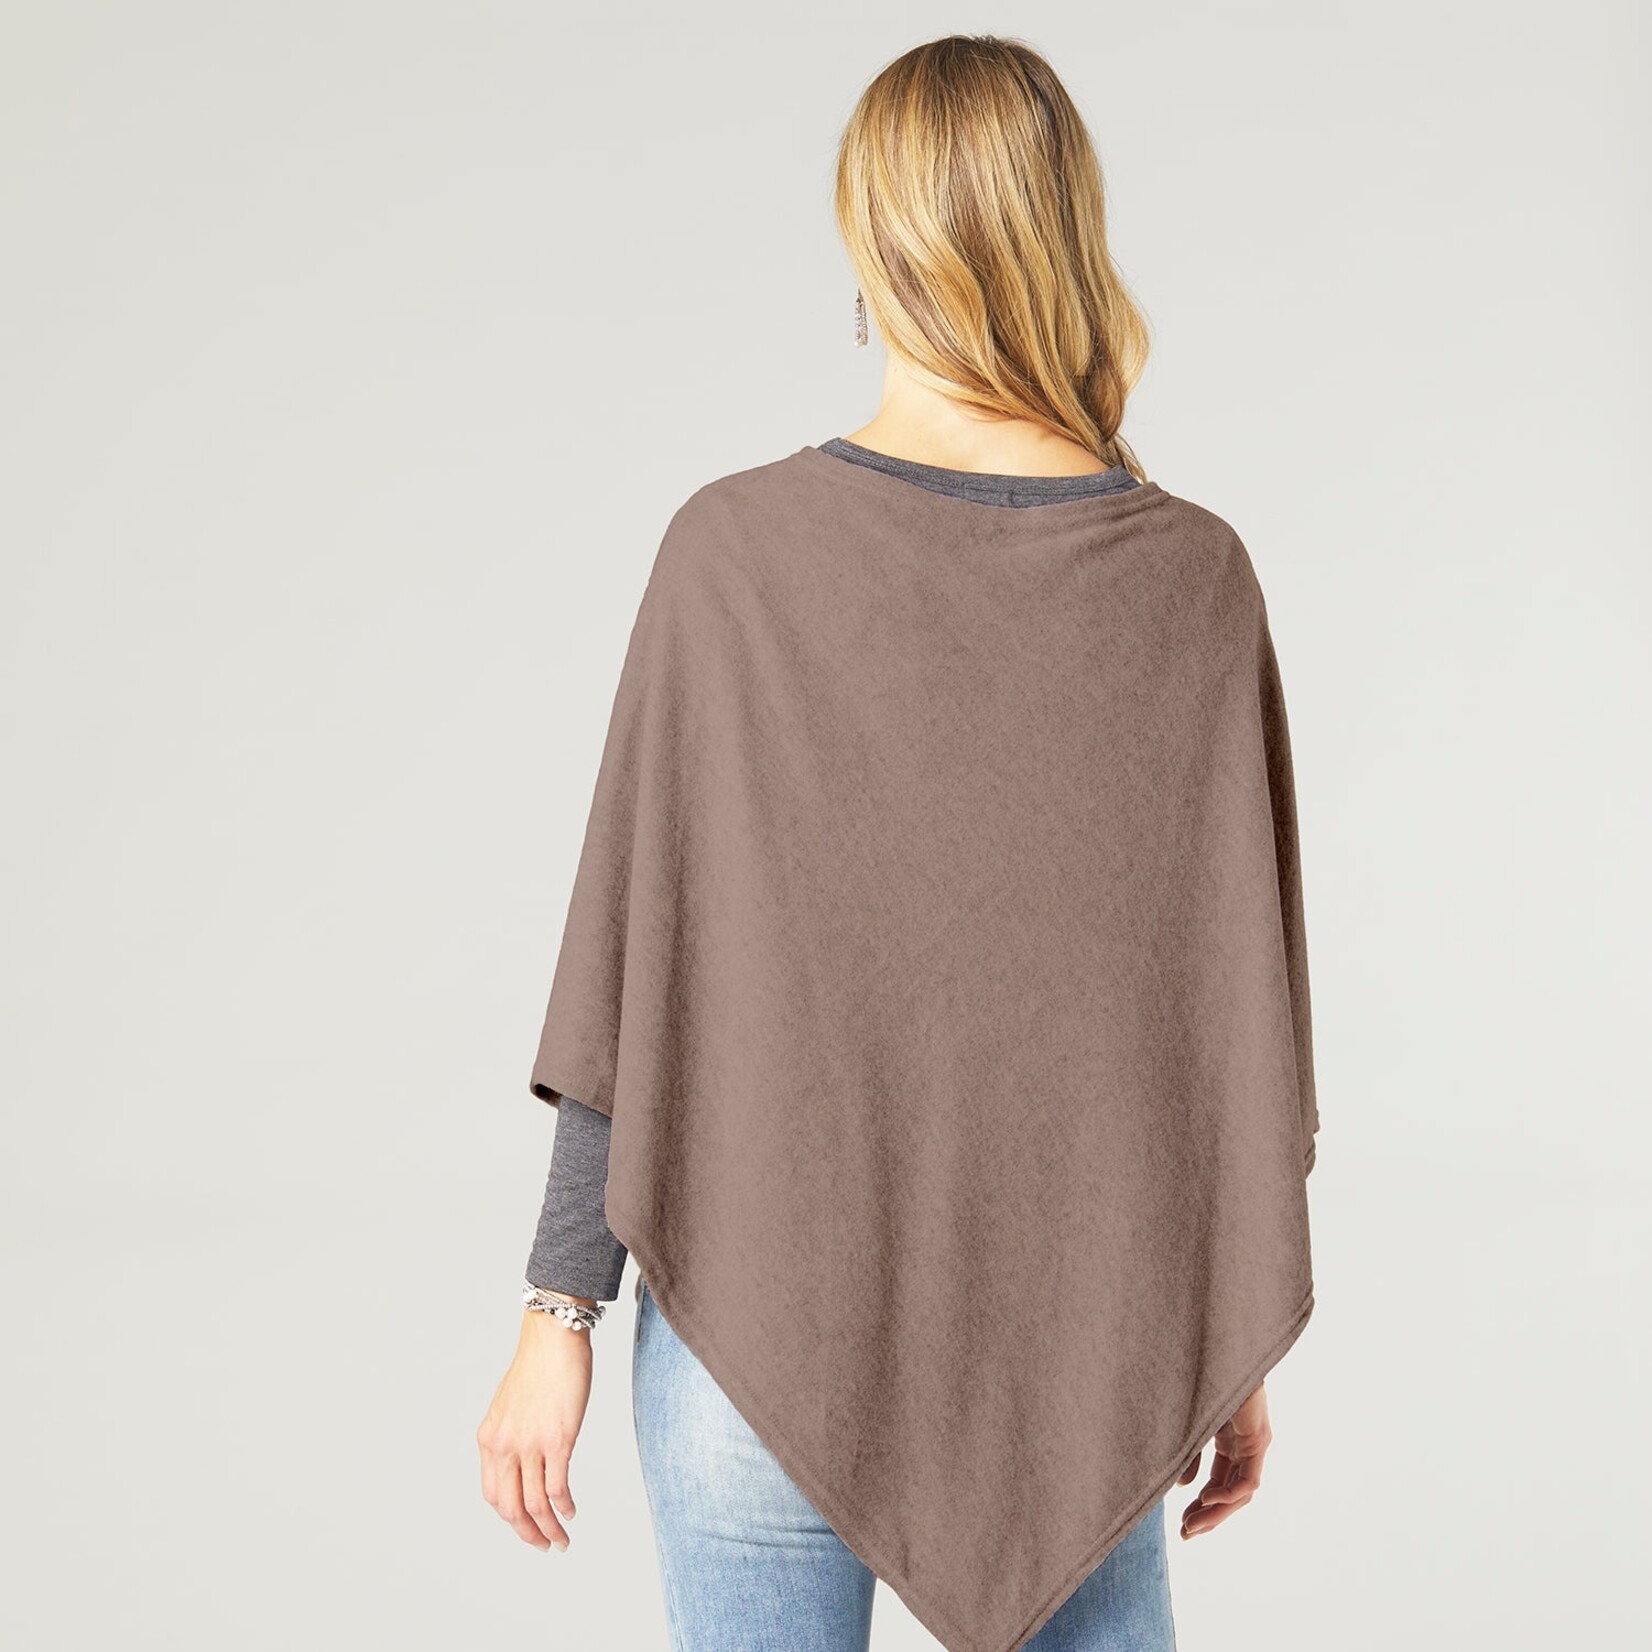 Coco+Carmen 2139038A Lightweight Brushed Poncho - Brown